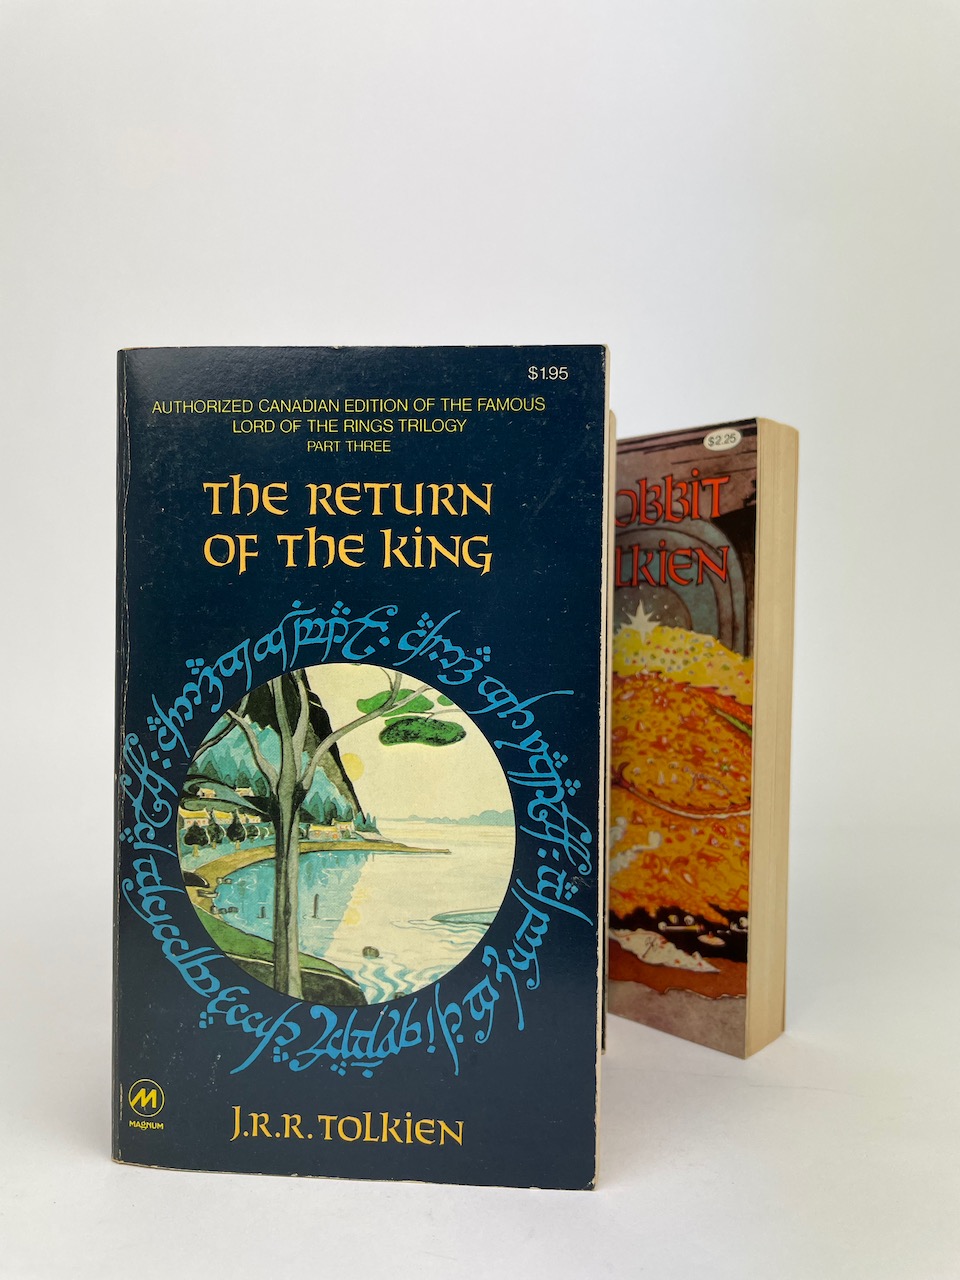 The Lord of the Rings and The Hobbit - Heroic Tales Set 1977 Magnum Edition 14